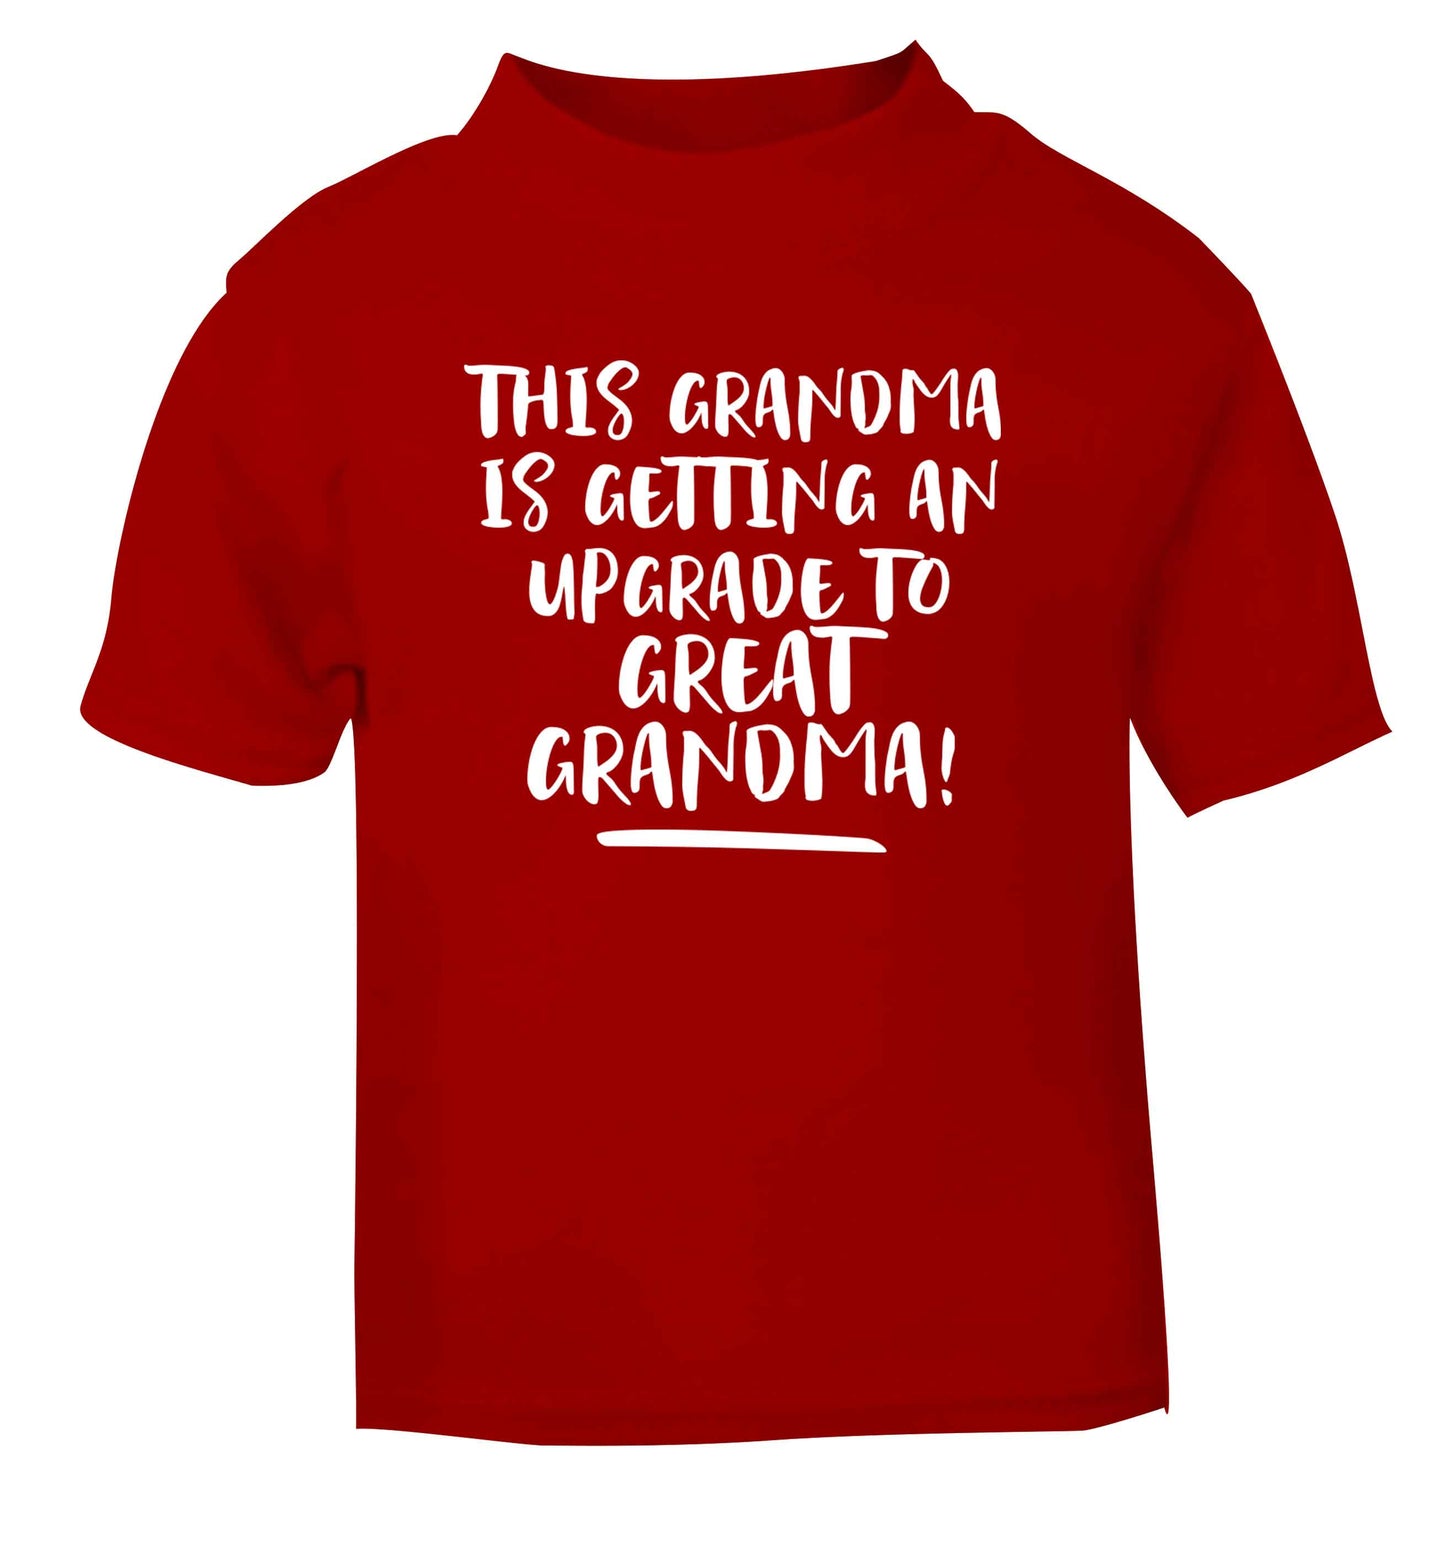 This grandma is getting an upgrade to great grandma! red Baby Toddler Tshirt 2 Years